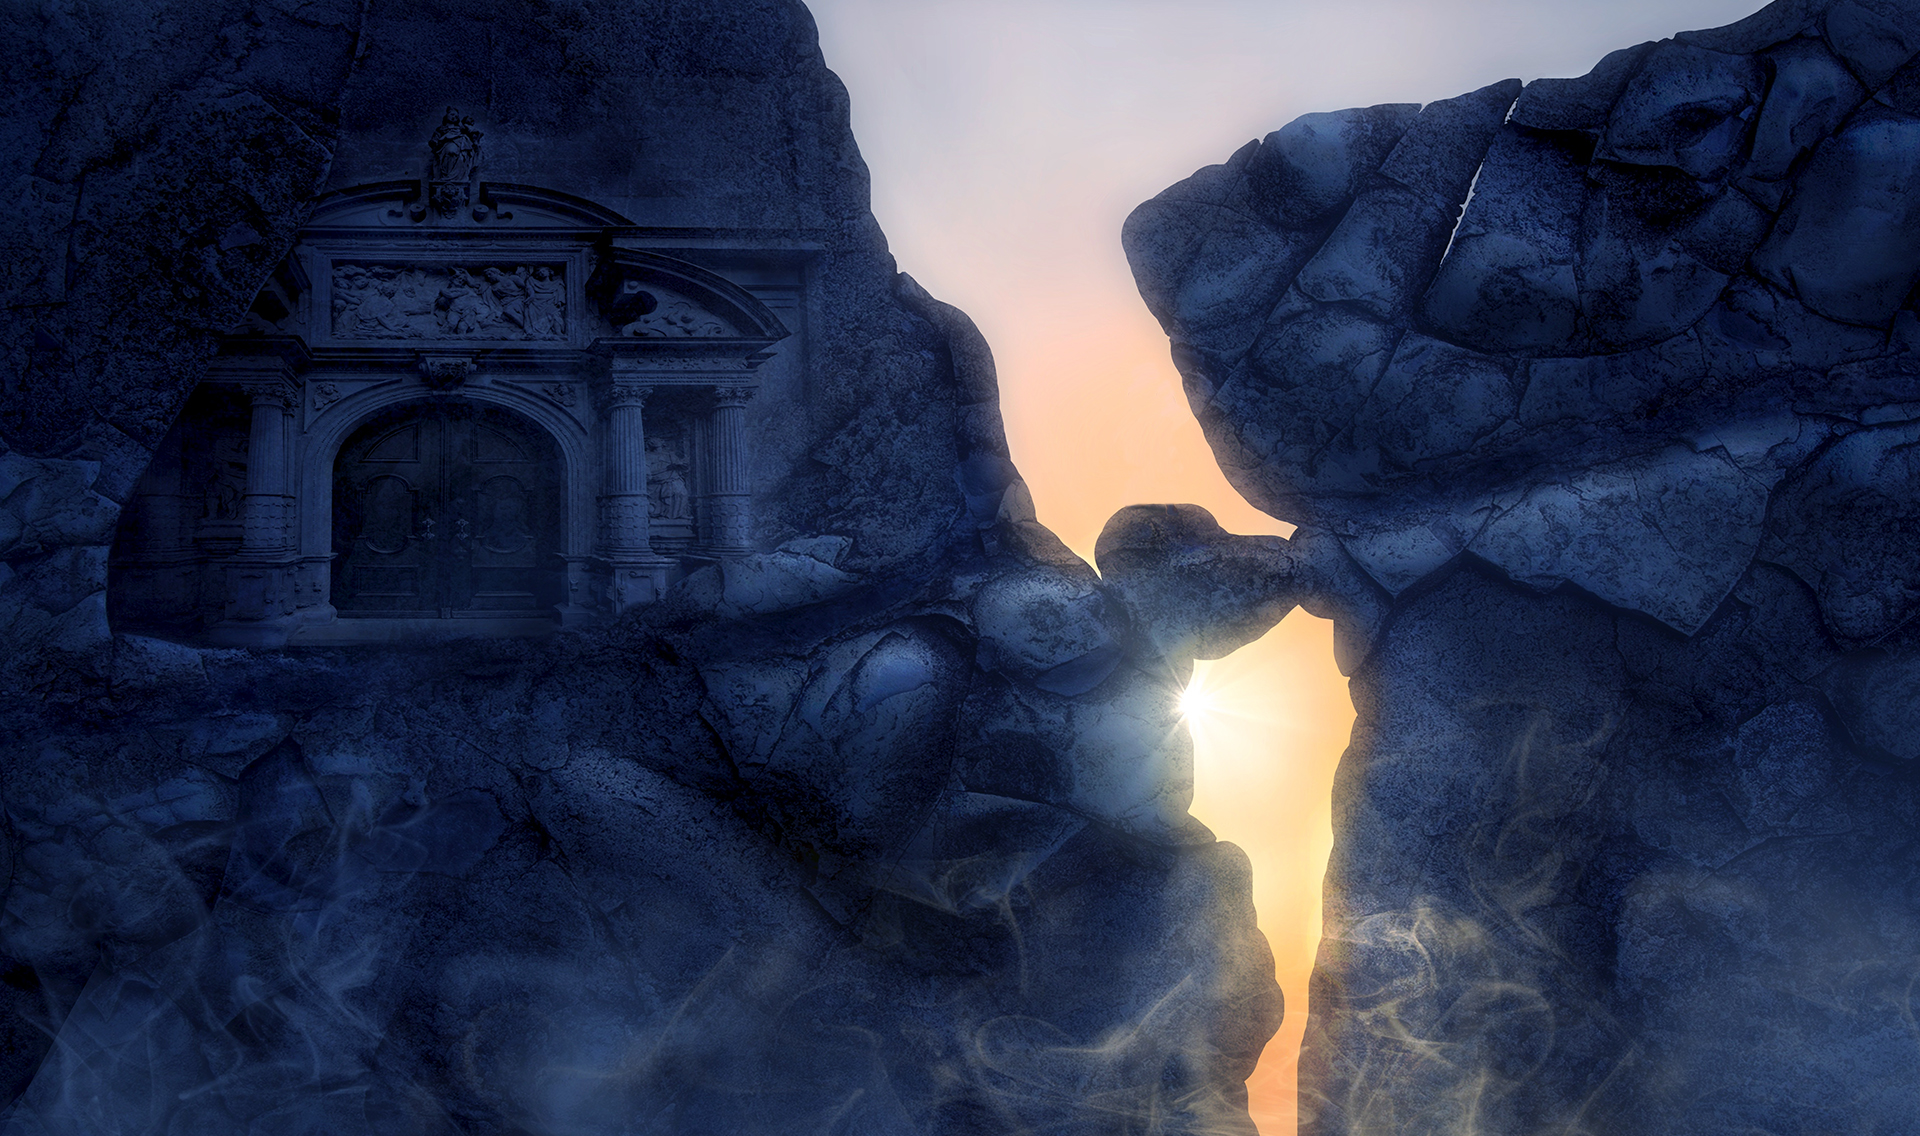 EXT. CLIFFSIDE TEMPLE – DAY